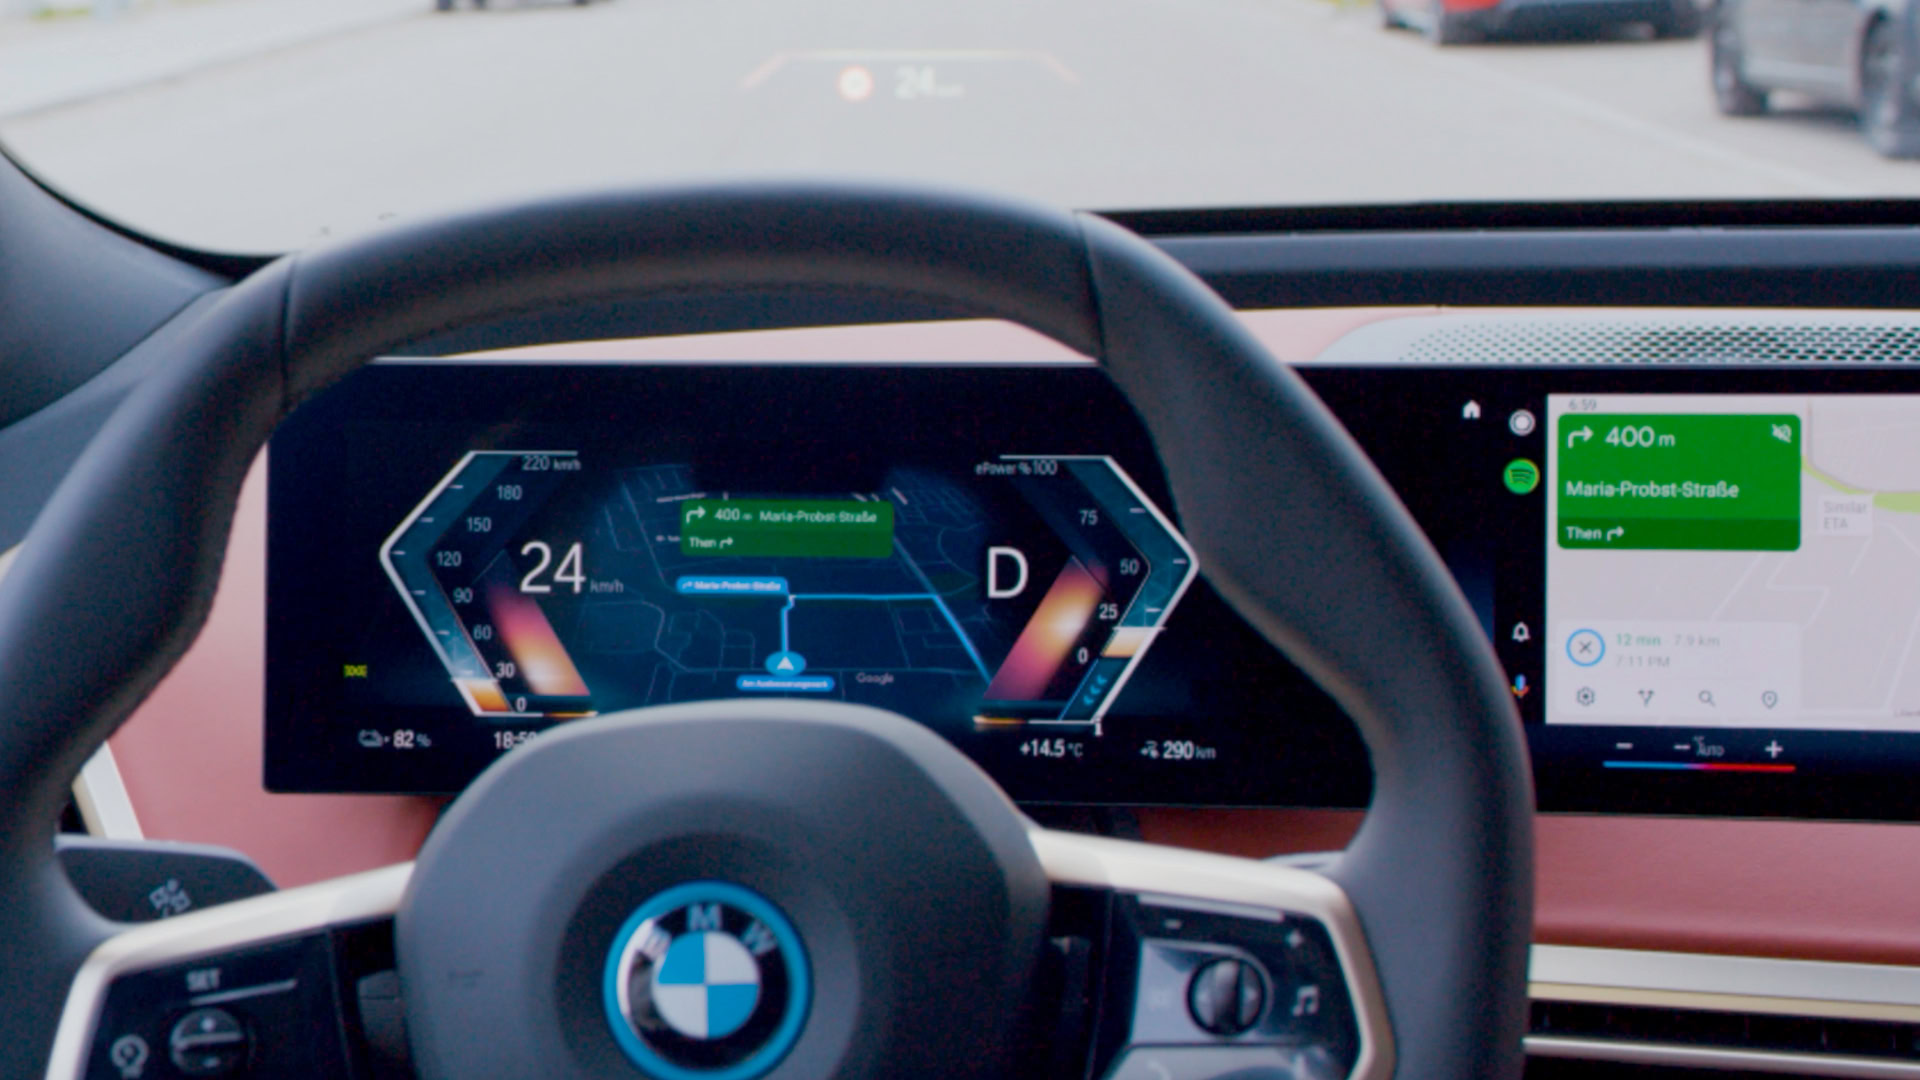 Android on a BMW instrument cluster